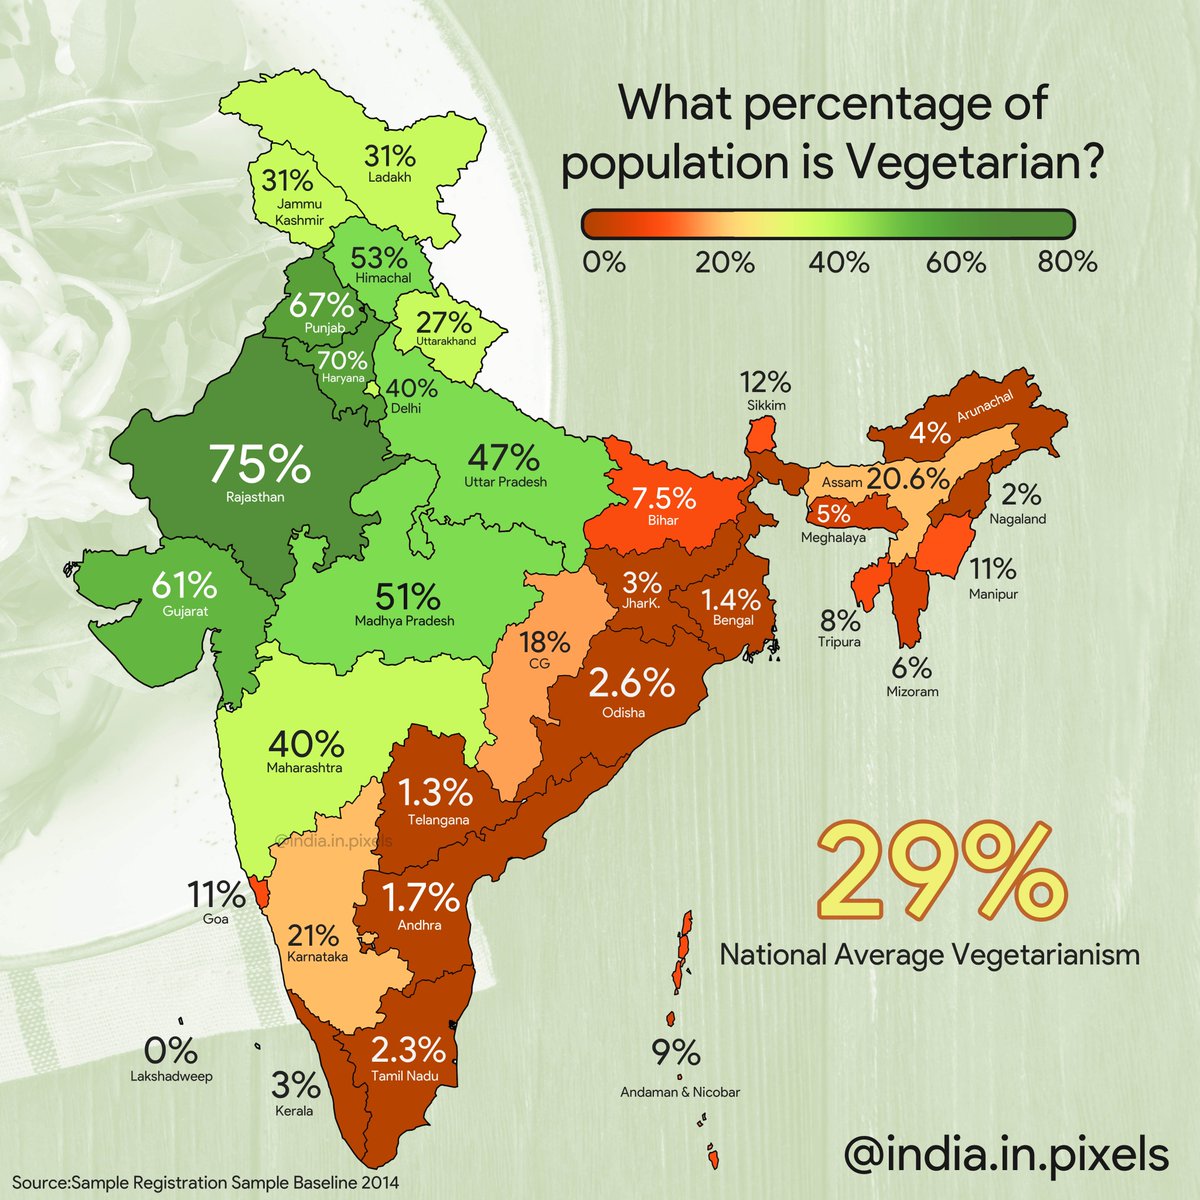 Percentage of population that is vegetarian in Indian States (2014)

Source: Union Government Sample Registration System Baseline Survey 2014 [large states] + Nutrition Journal [NE States]